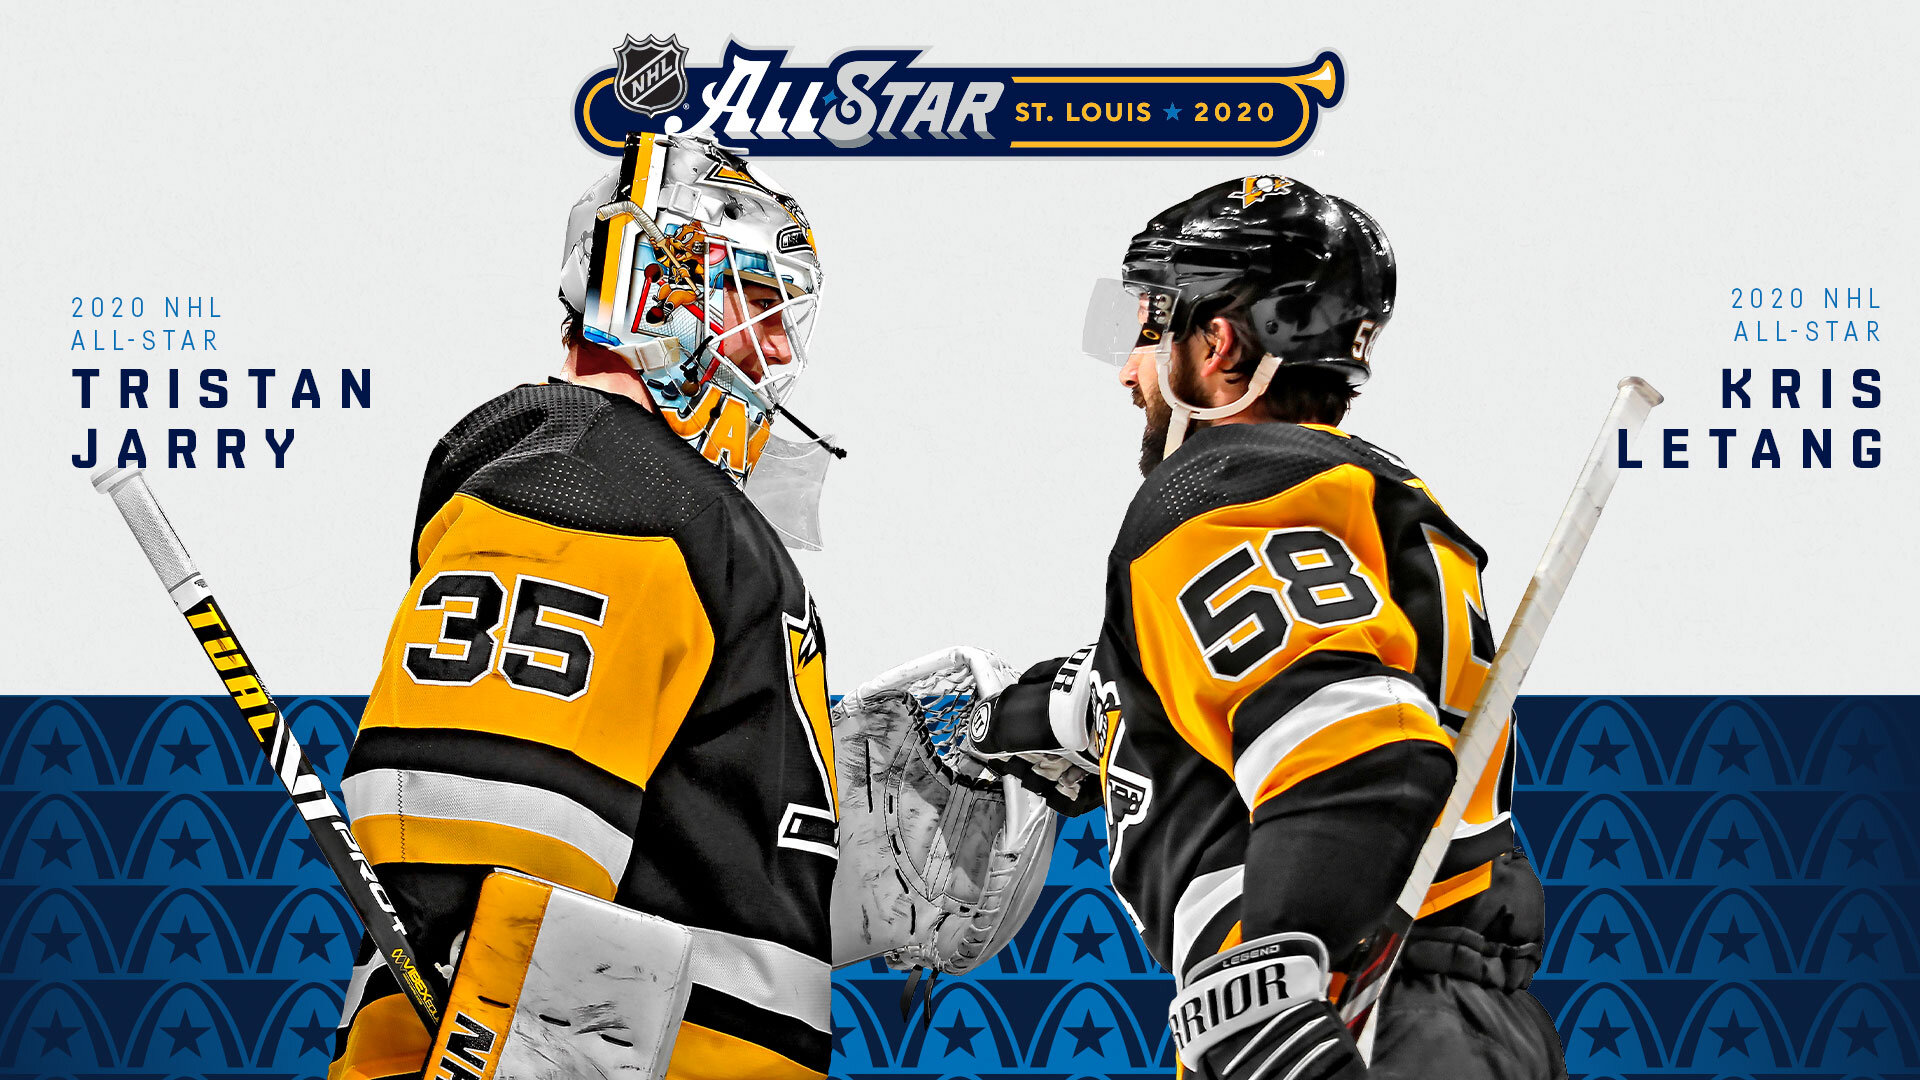 Tristan Jarry and Kris Letang All-Star 2020 Selection